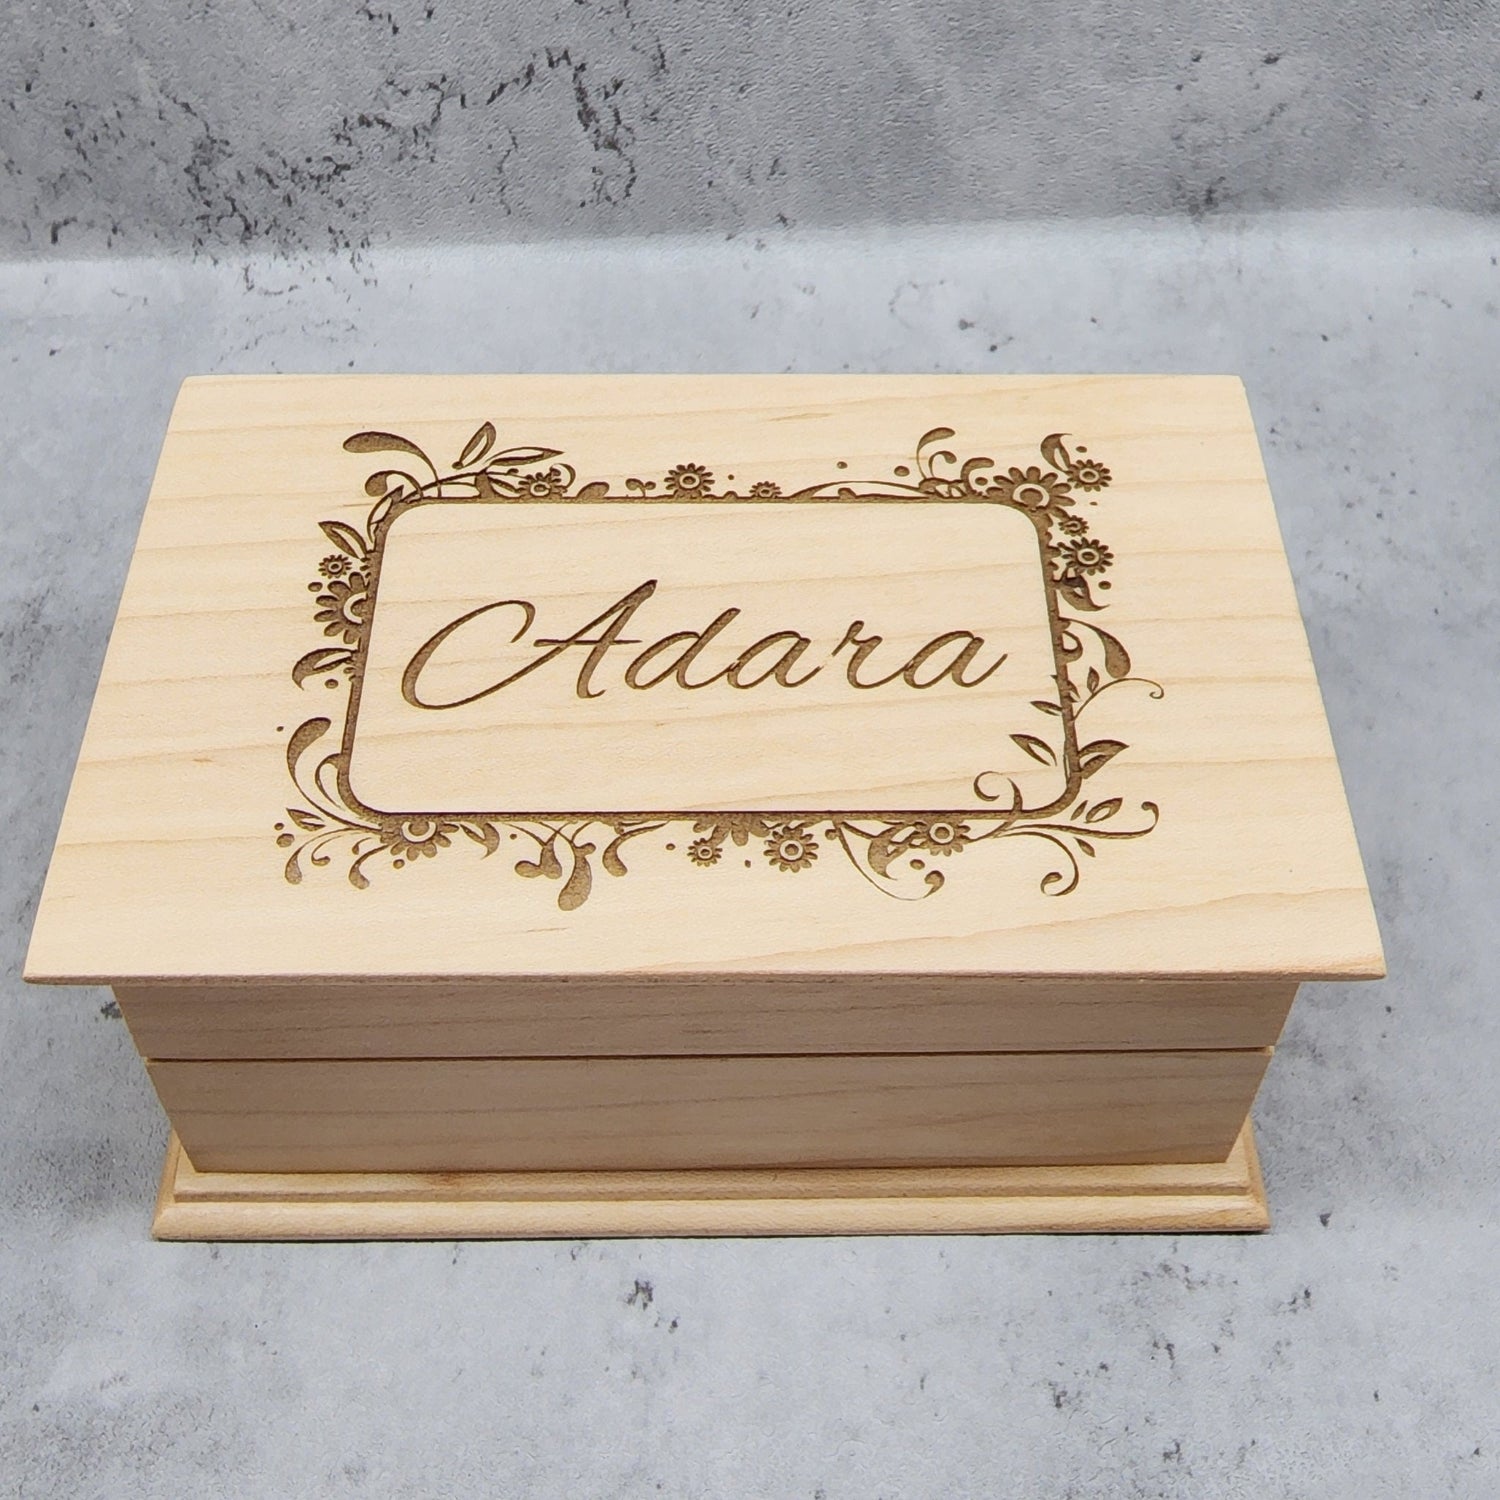 Jewelry box with a floral frame and name engraved in cursive, choose color and any songs